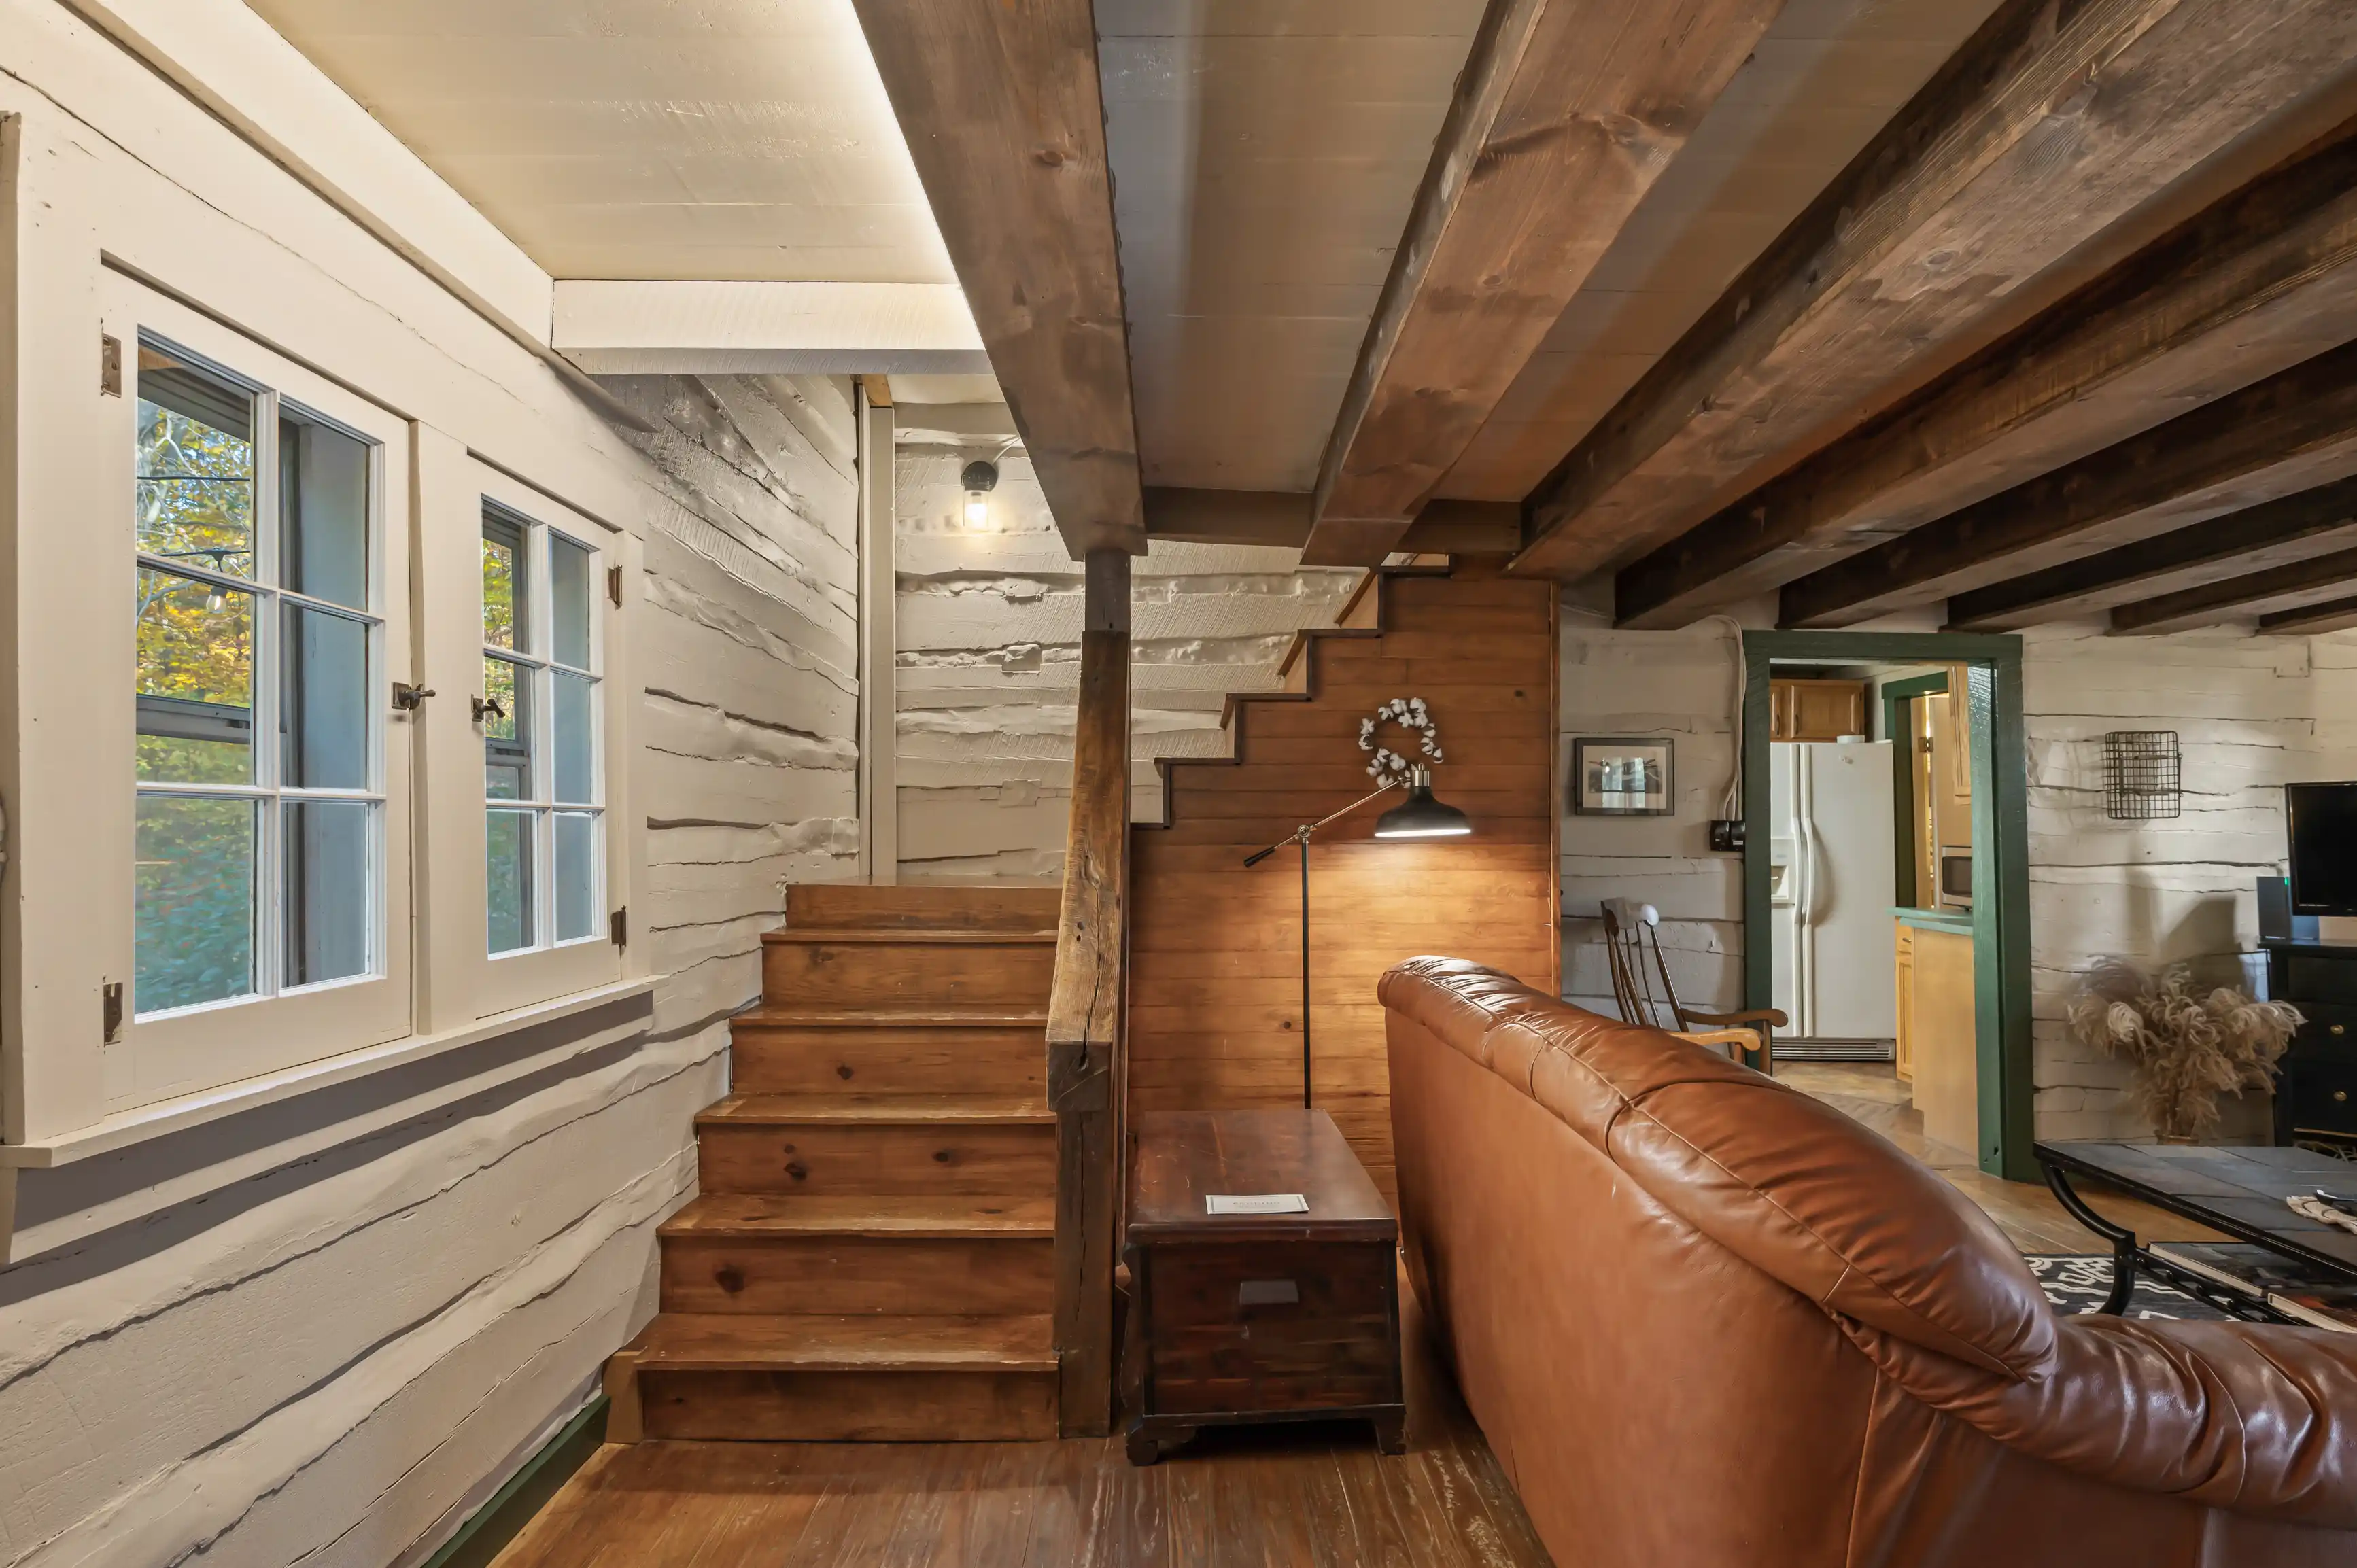 Interior of a cozy cabin with wooden stairs, walls, and beams, featuring a brown leather couch and modern amenities.